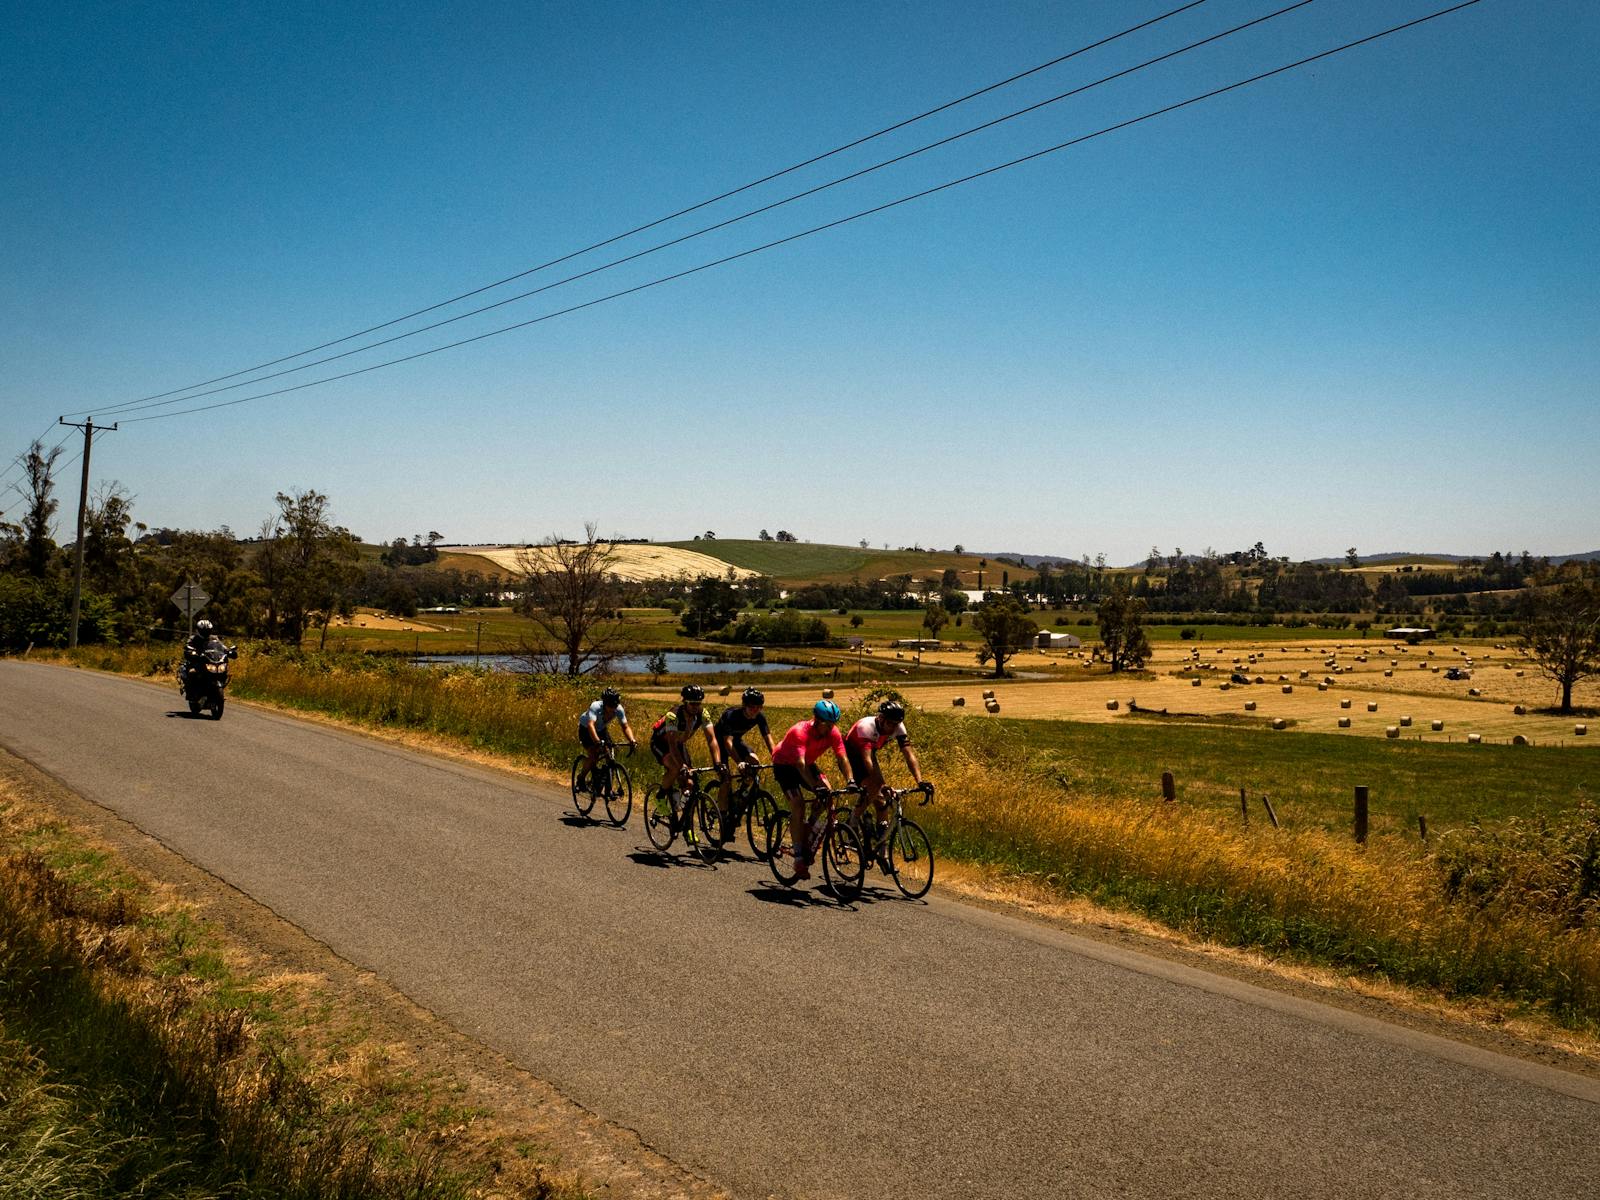 Cyclists on a country road